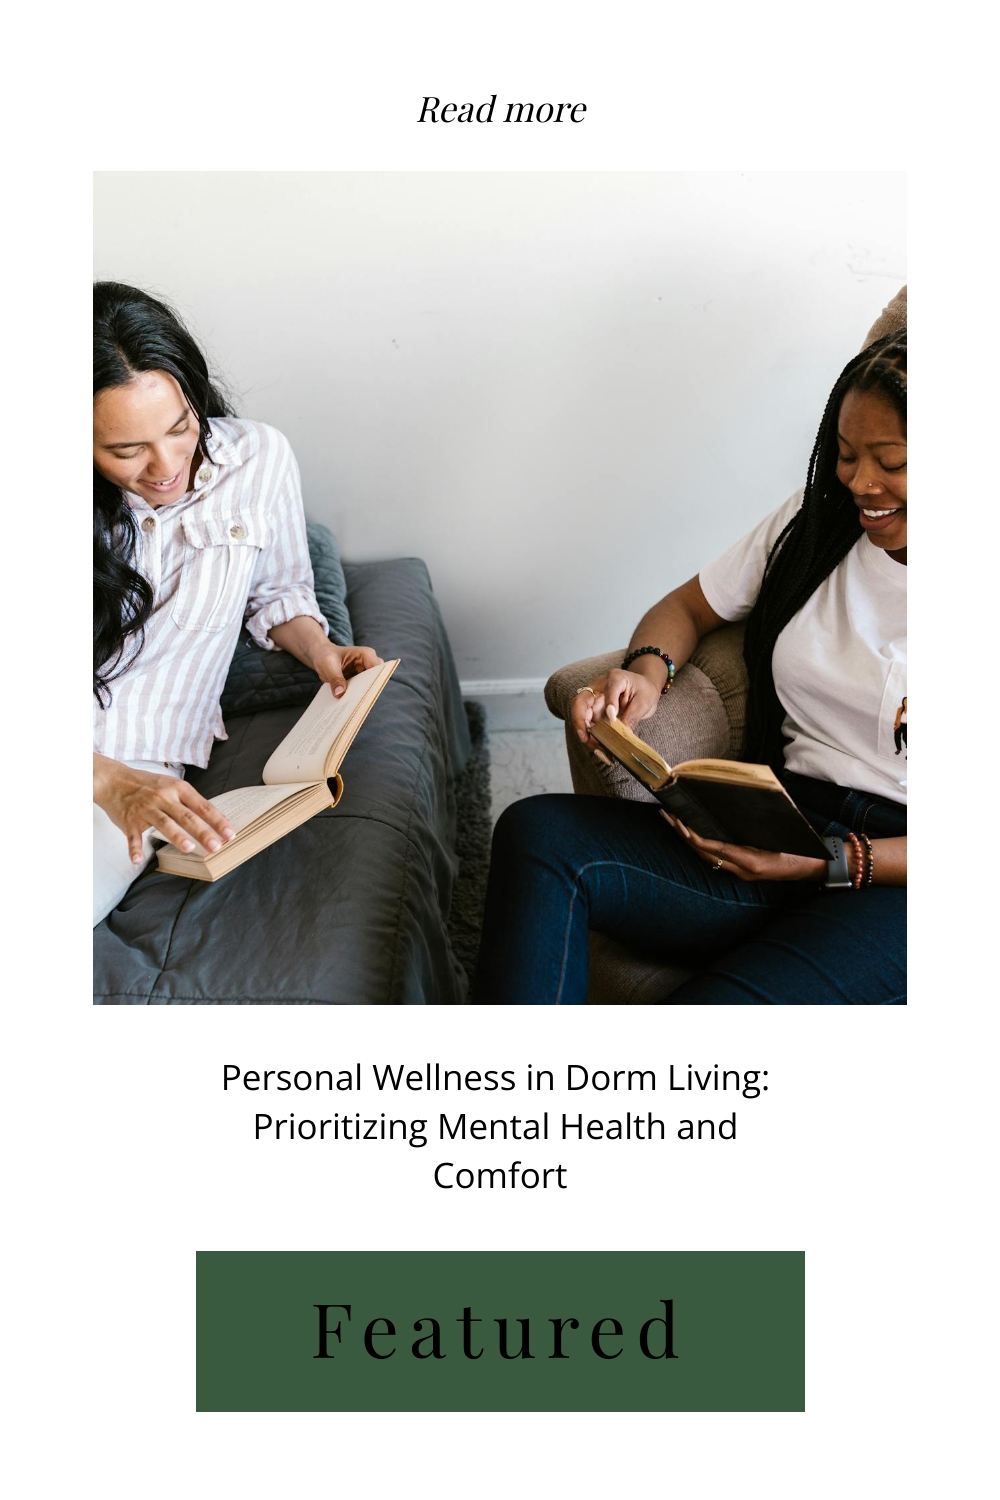 Personal Wellness in Dorm Living: Prioritizing Mental Health and Comfort